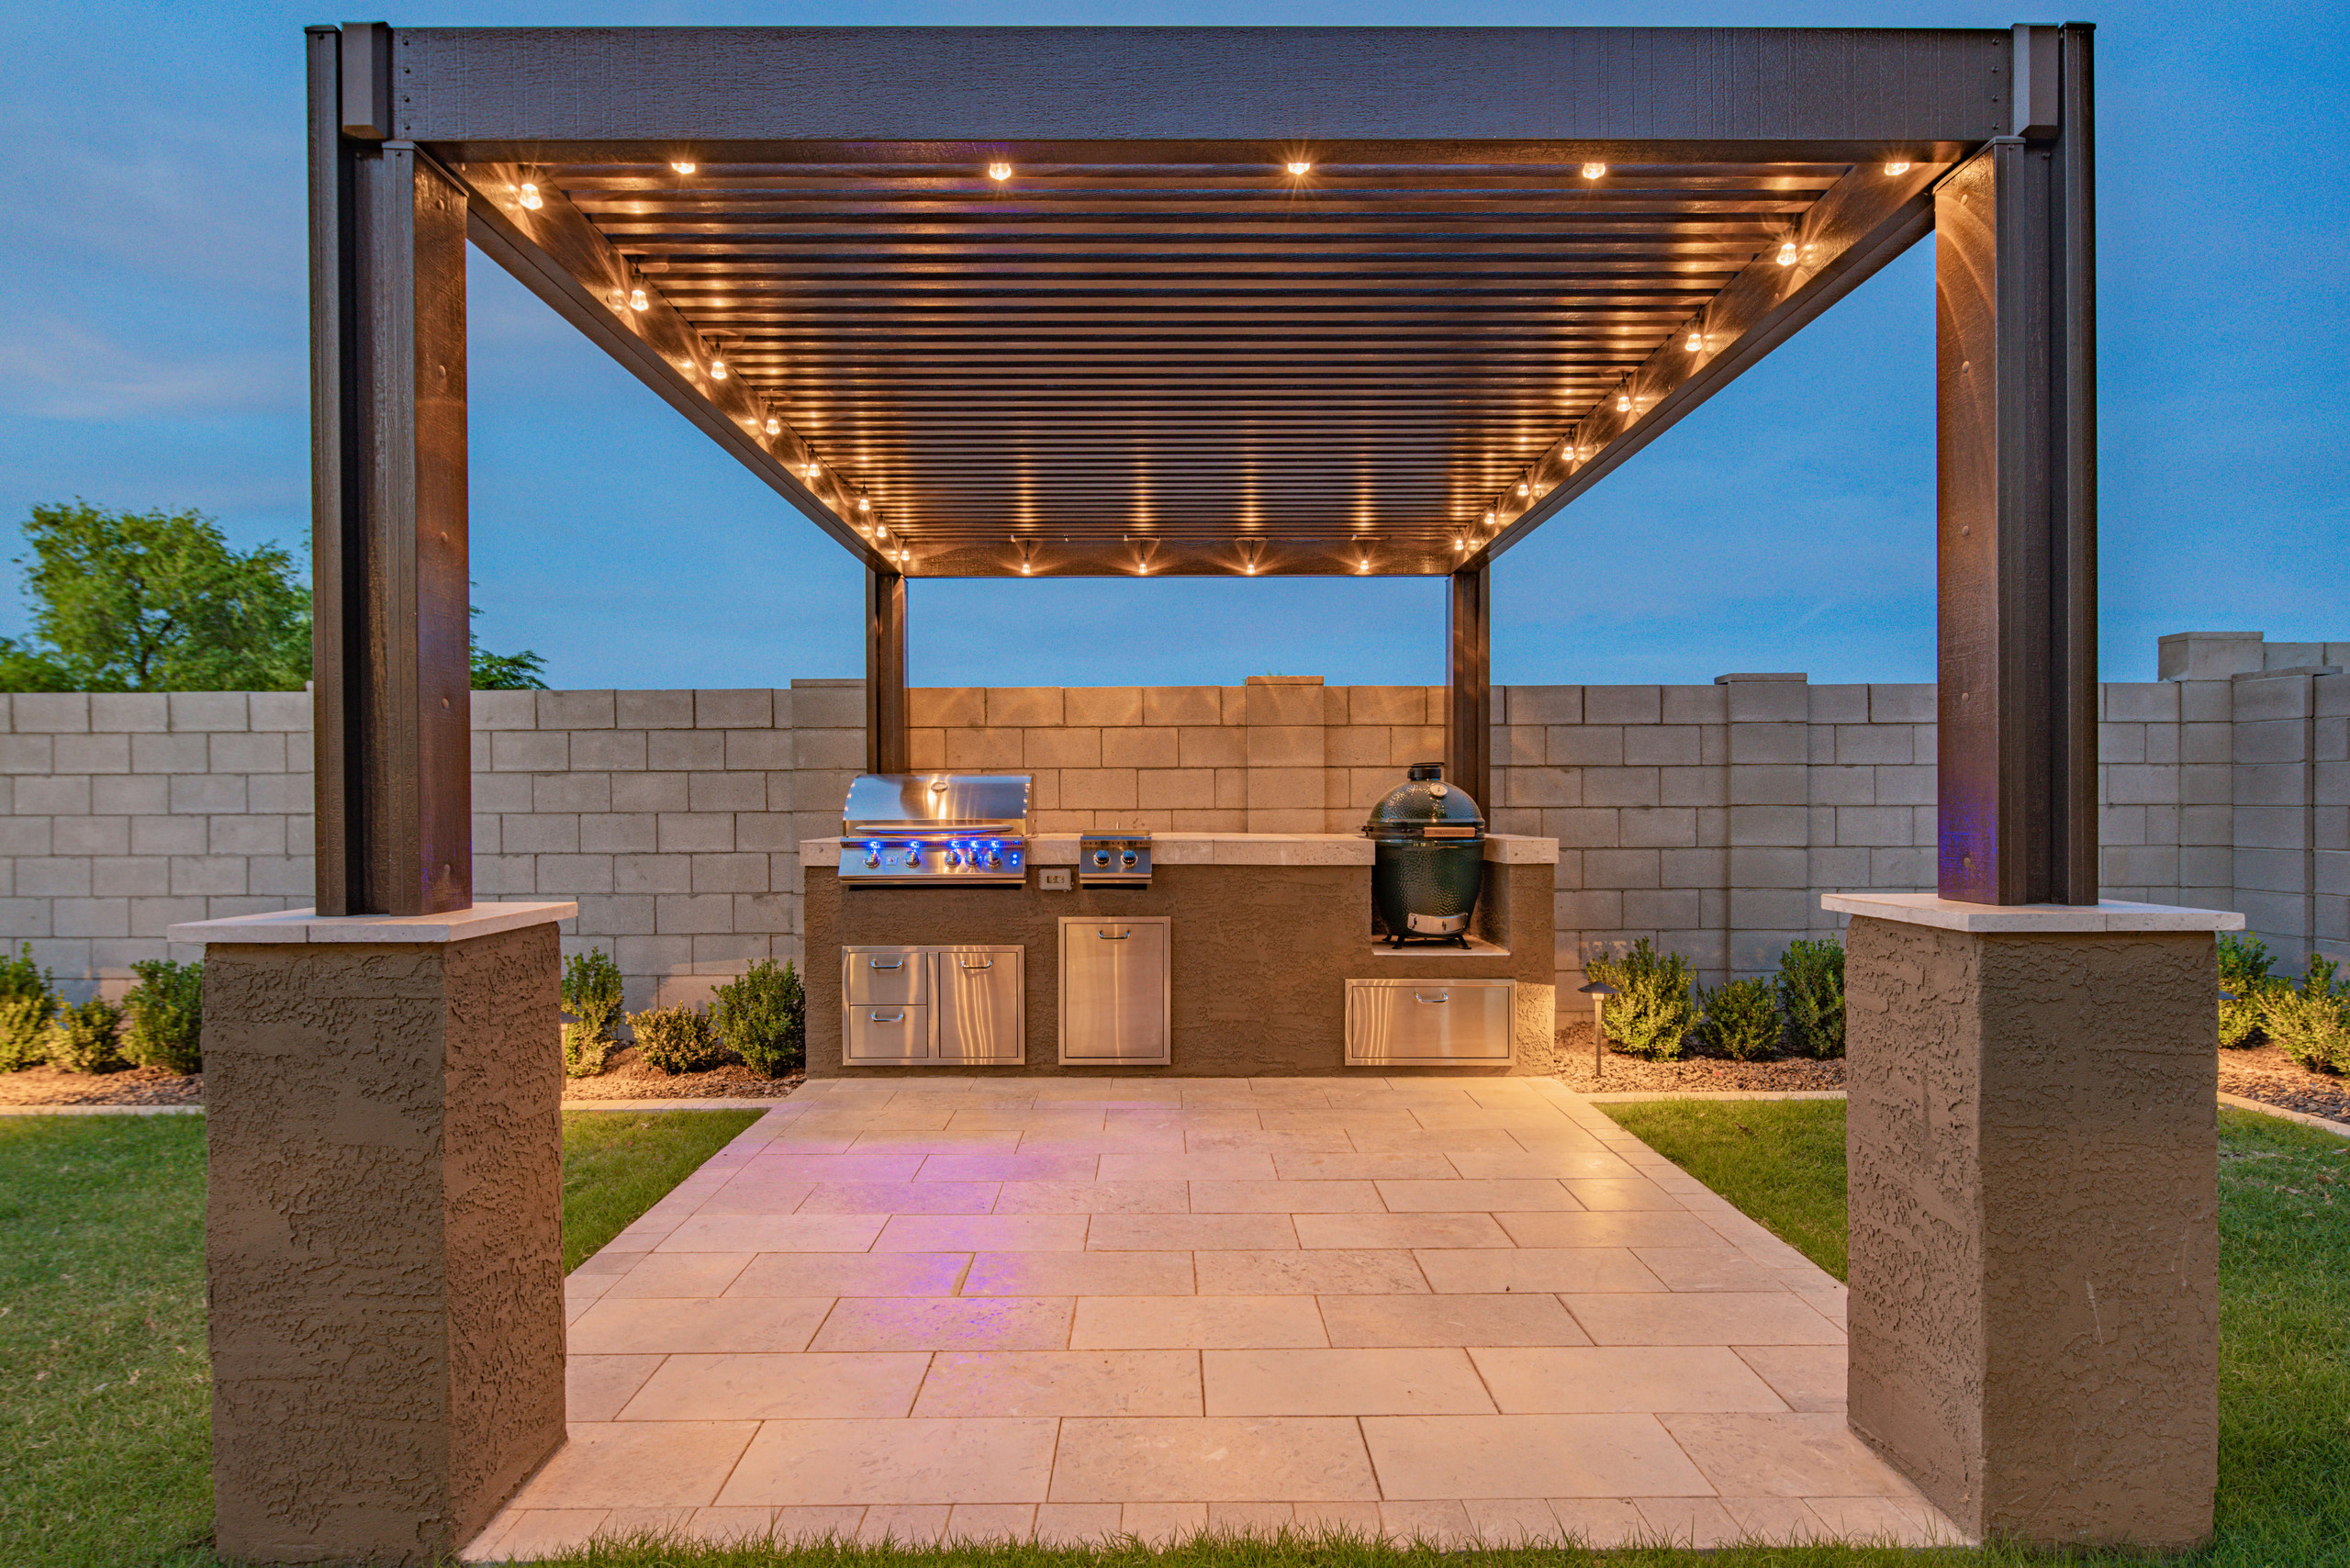 Aluminum pergola with outdoor grill station and a paver patio design idea